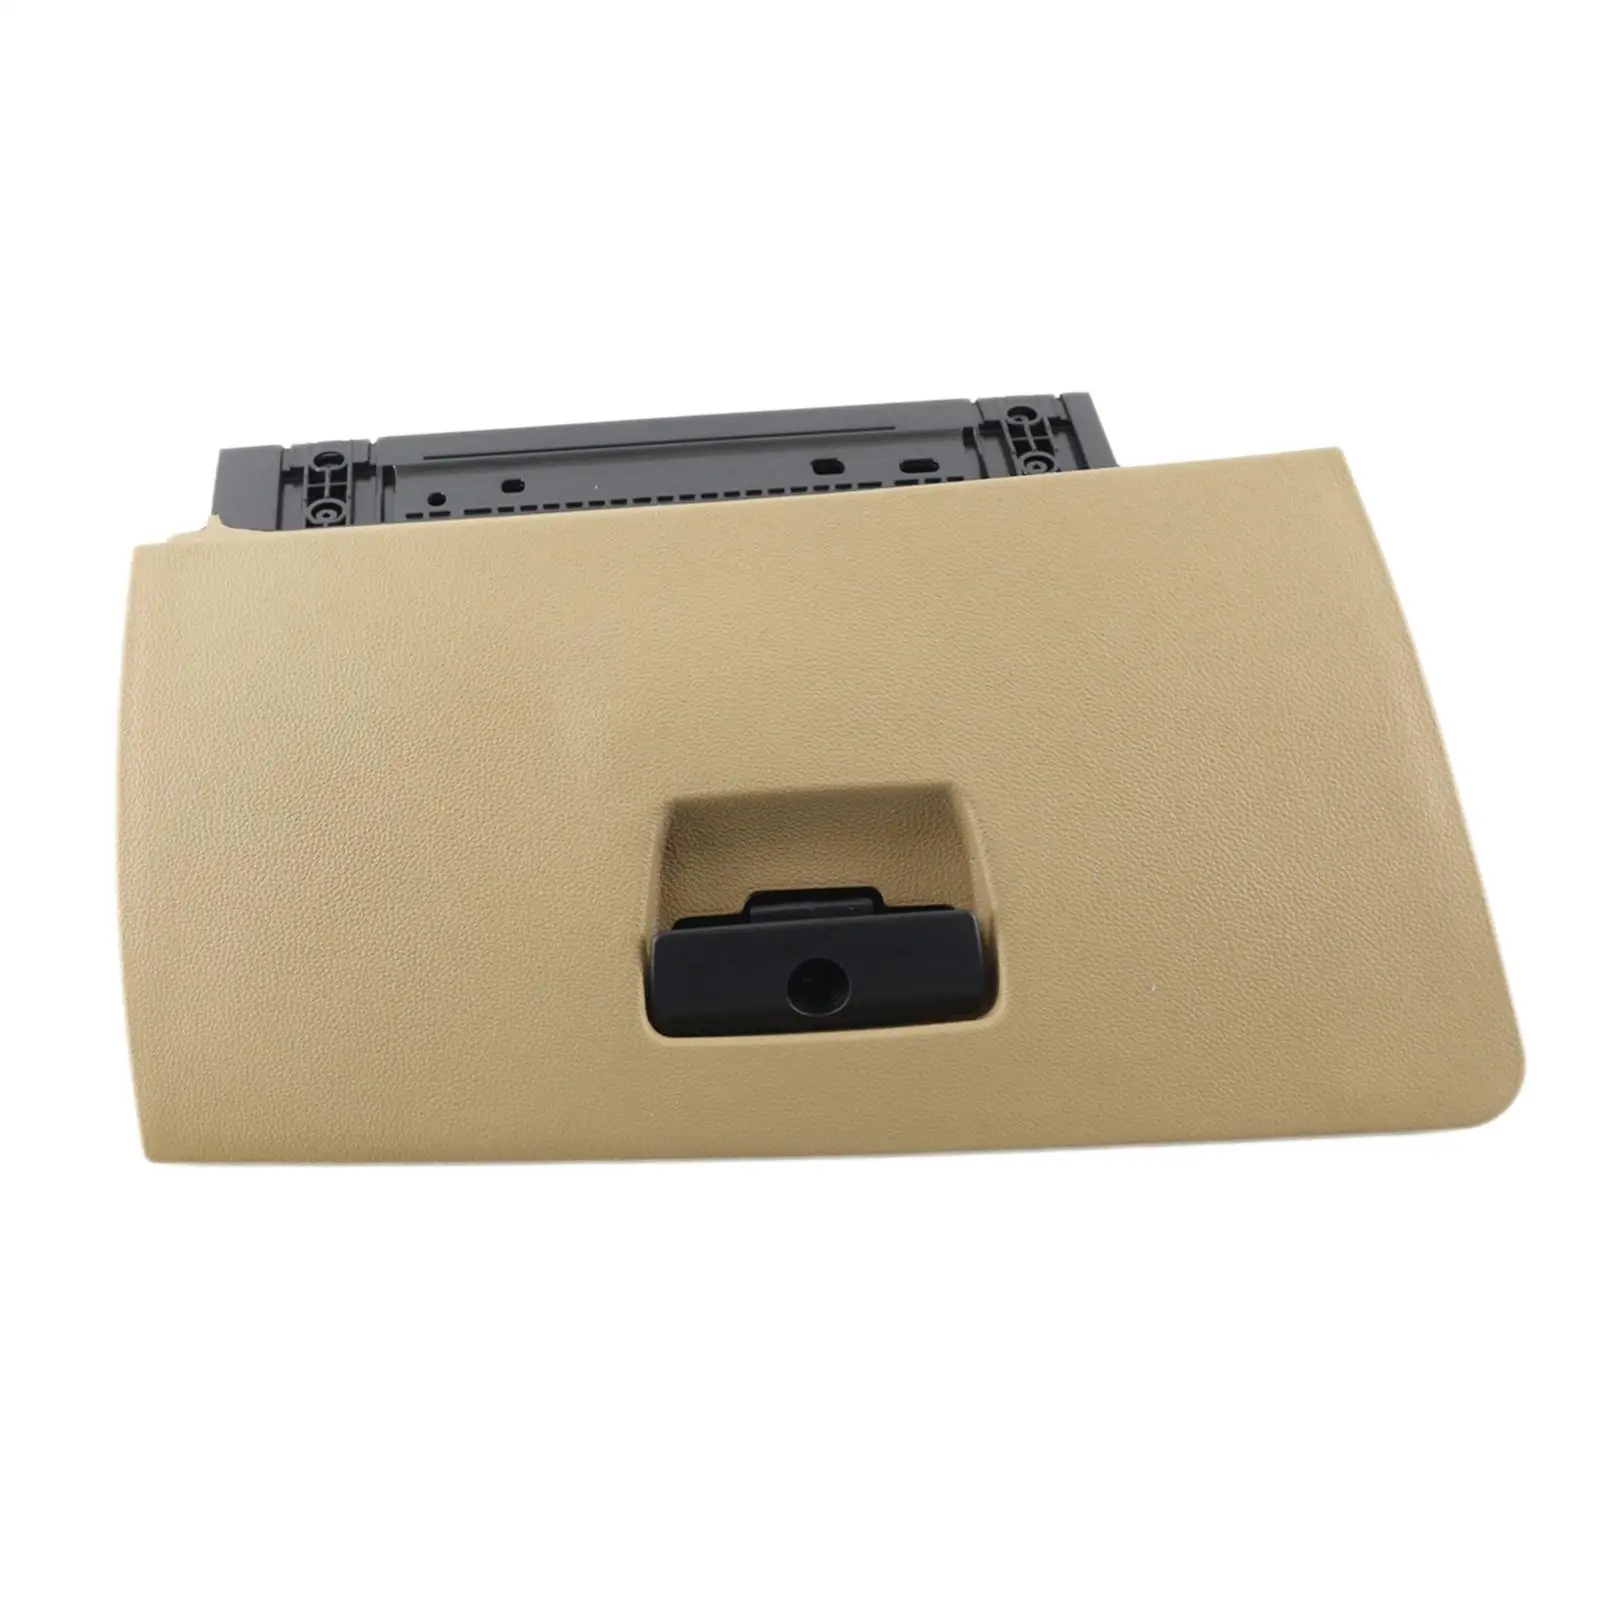 Glovebox Accessory Replaces Professional Easy to Install Durable Glove Box Storage Compartment for BMW E90 D91 E92 06-13